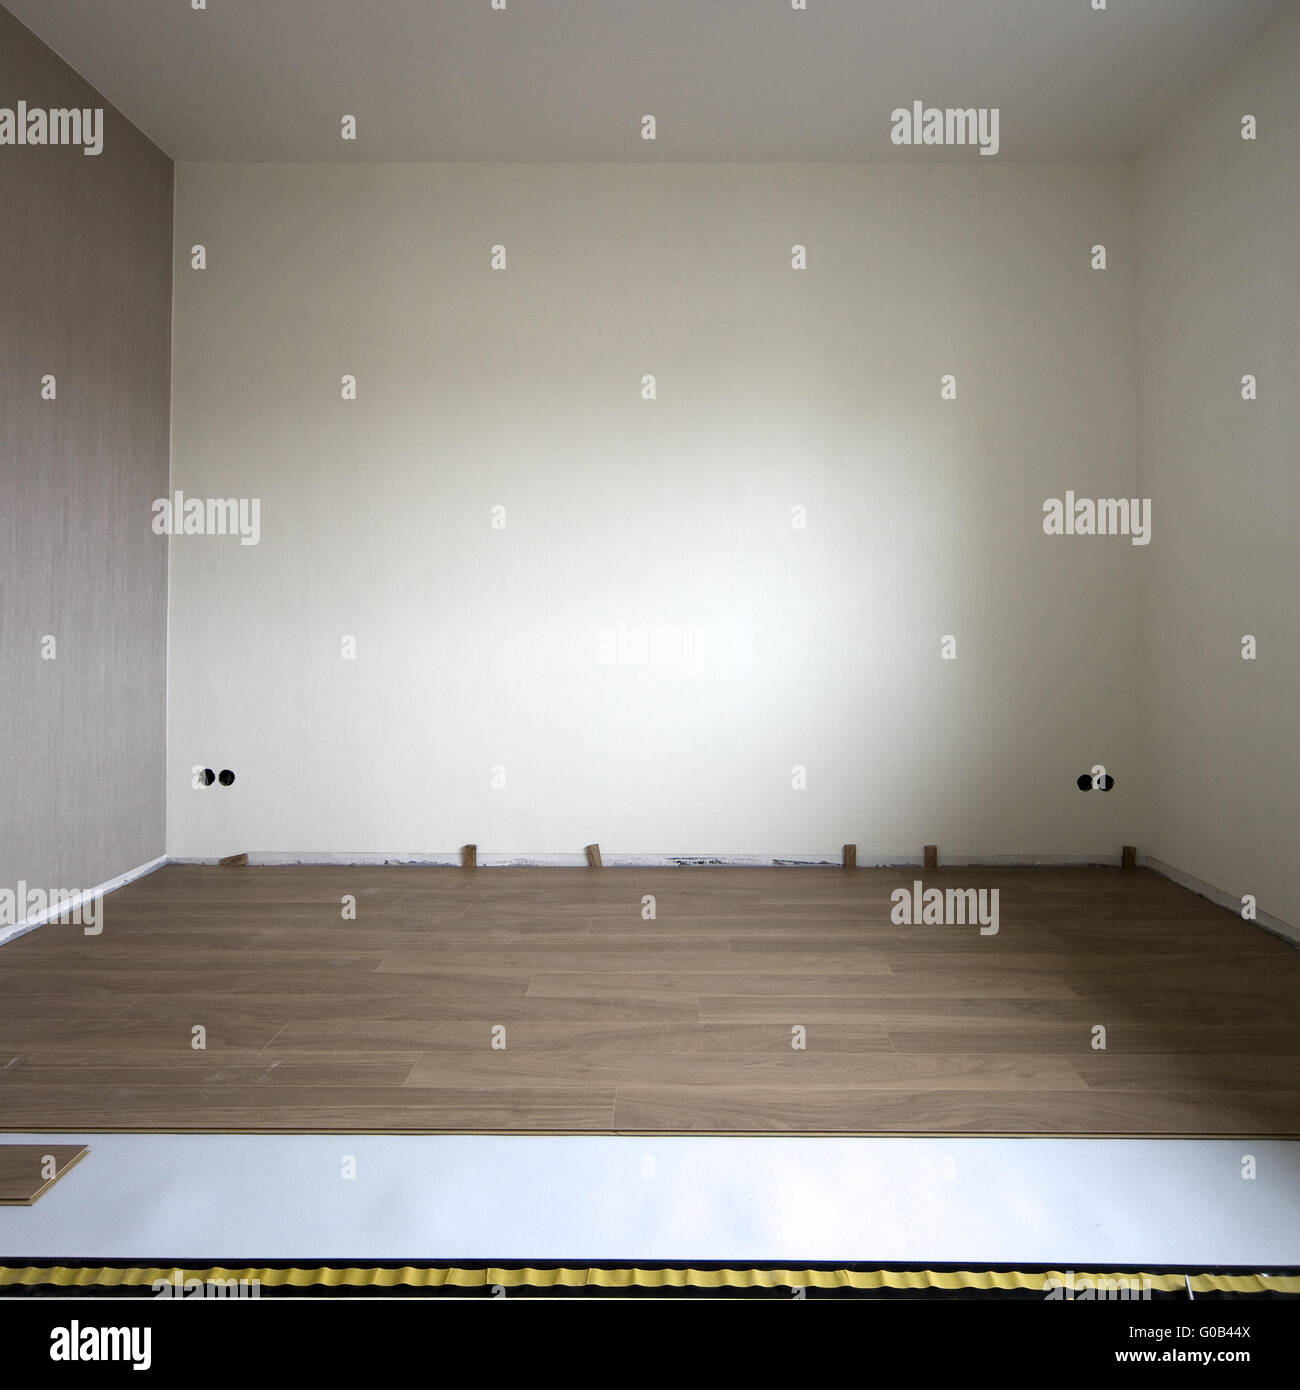 Laminate installation in new home Stock Photo